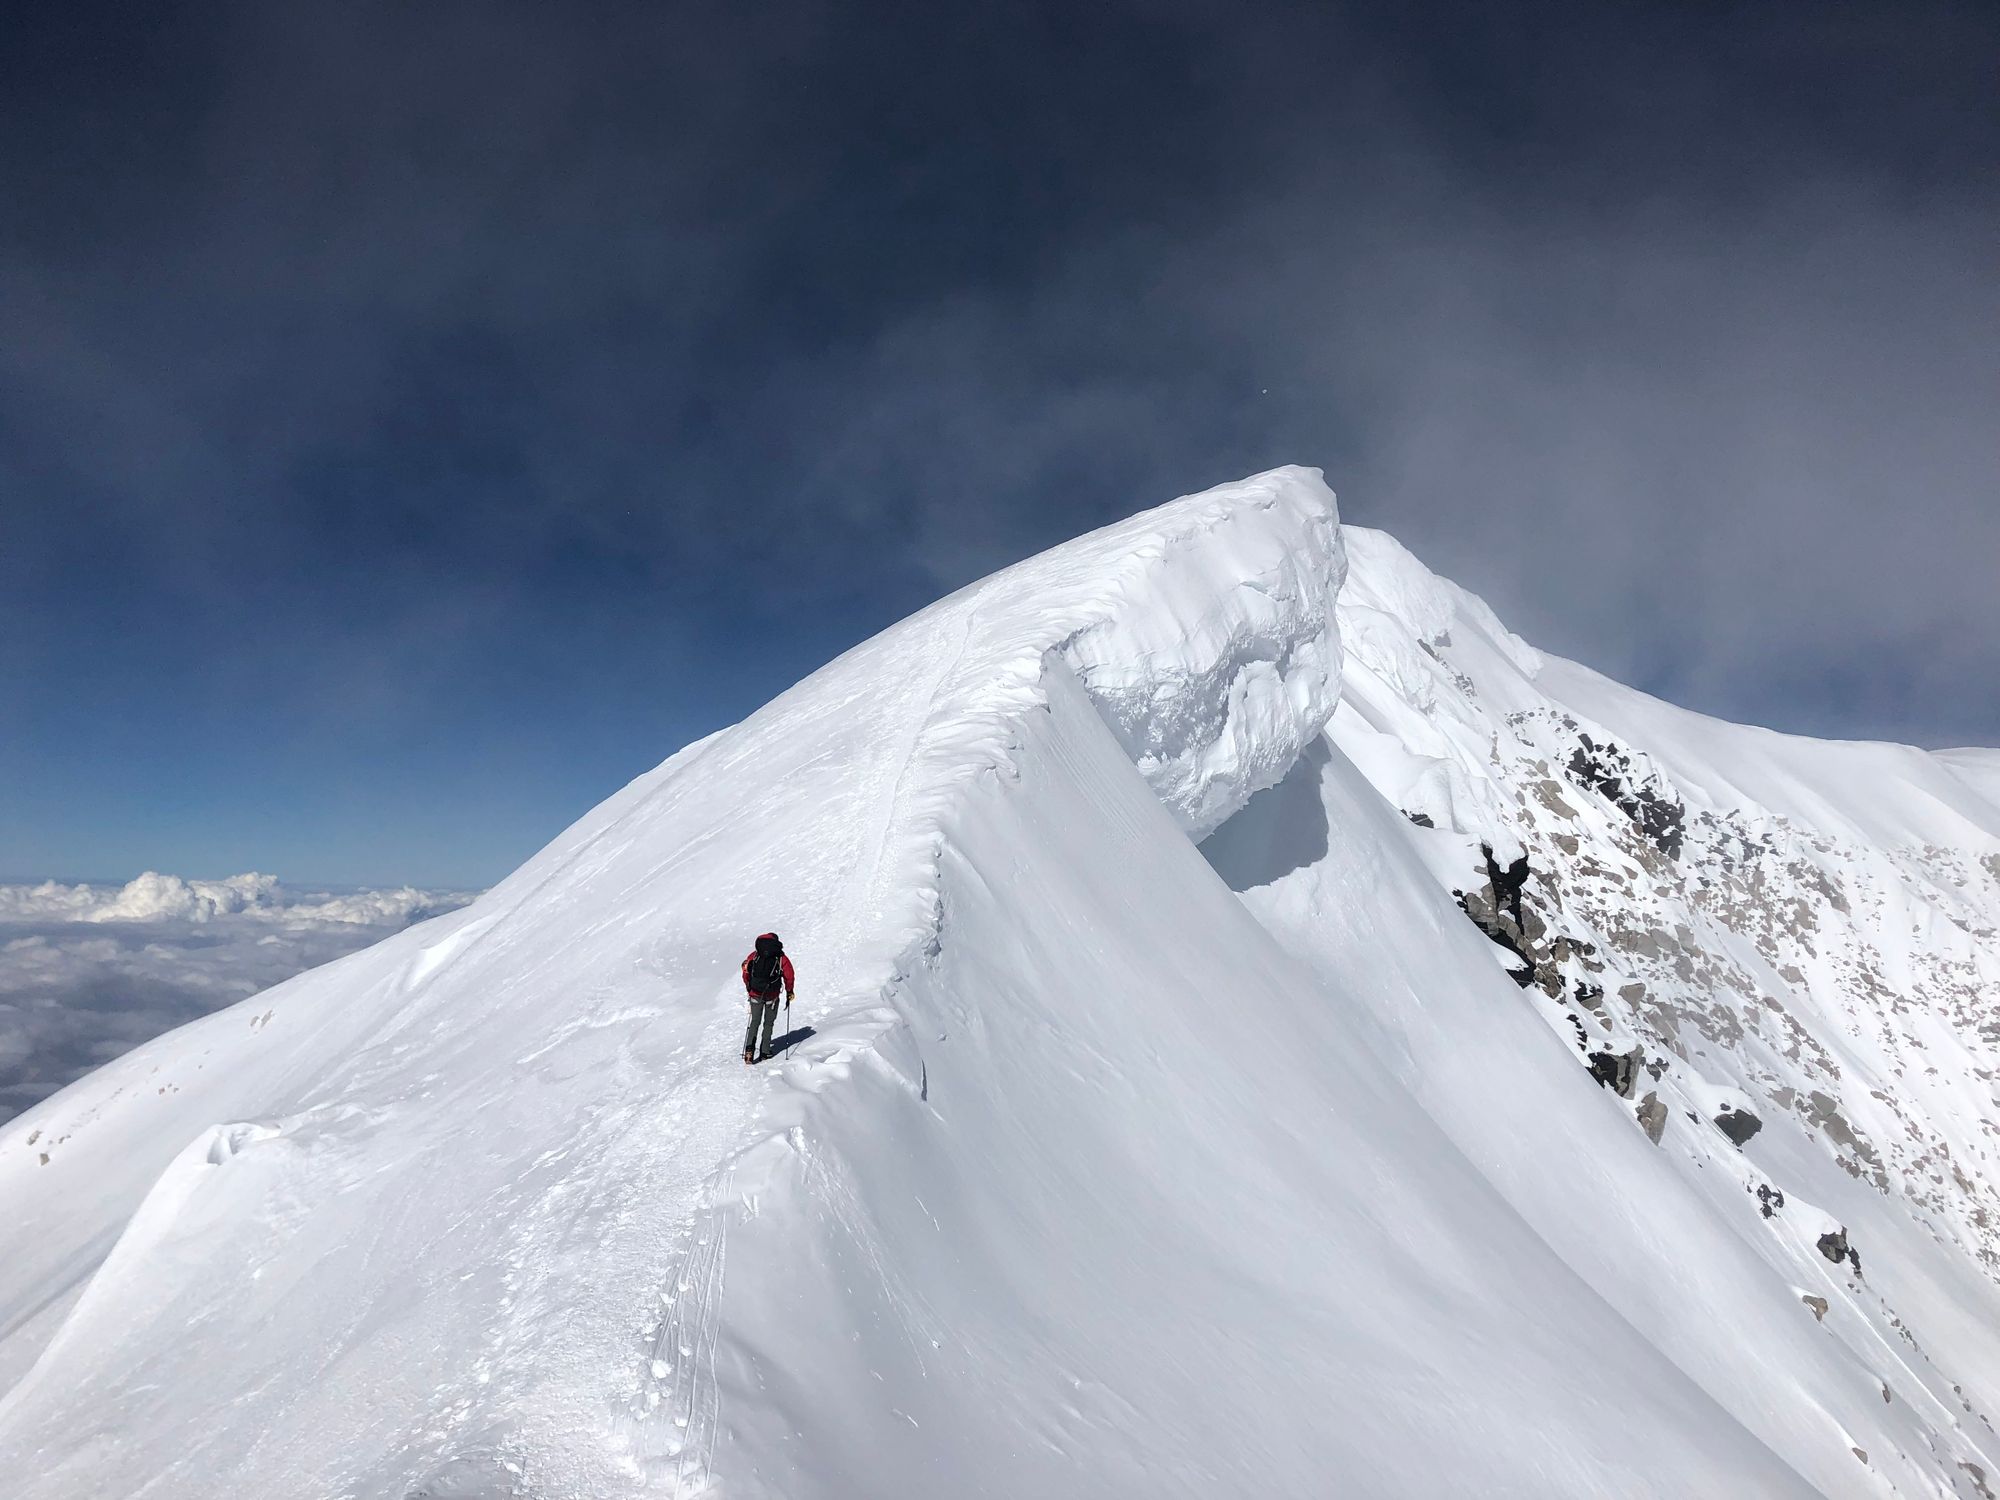 On Denali Ridge, heading for the summit. Photo: Project 50 in 50